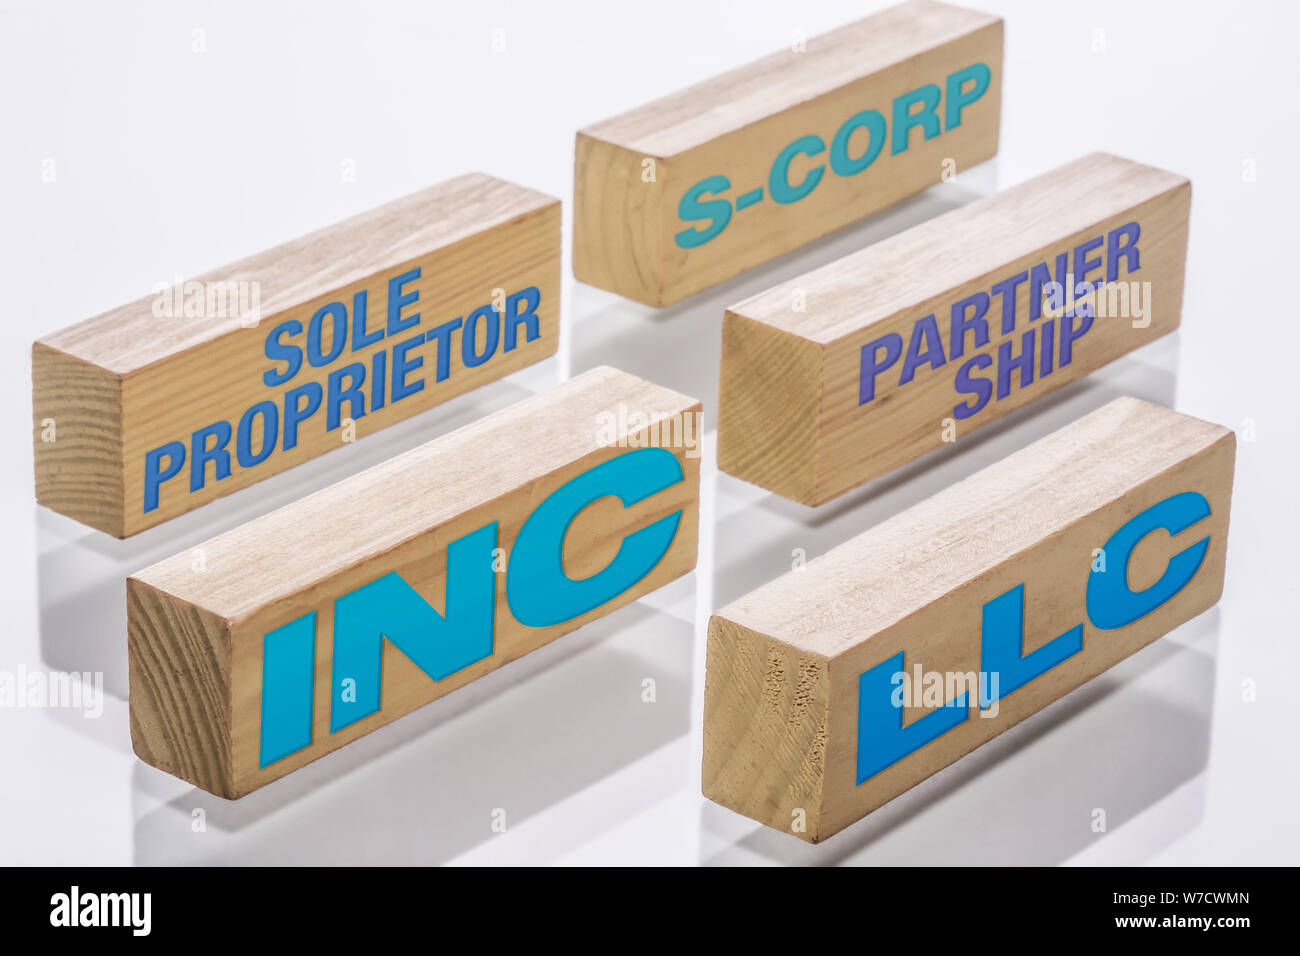 Main types of business formations including Sole proprietorship, S-corp, partnership, LLC and Incorporations, represented by building blocks. Stock Photo